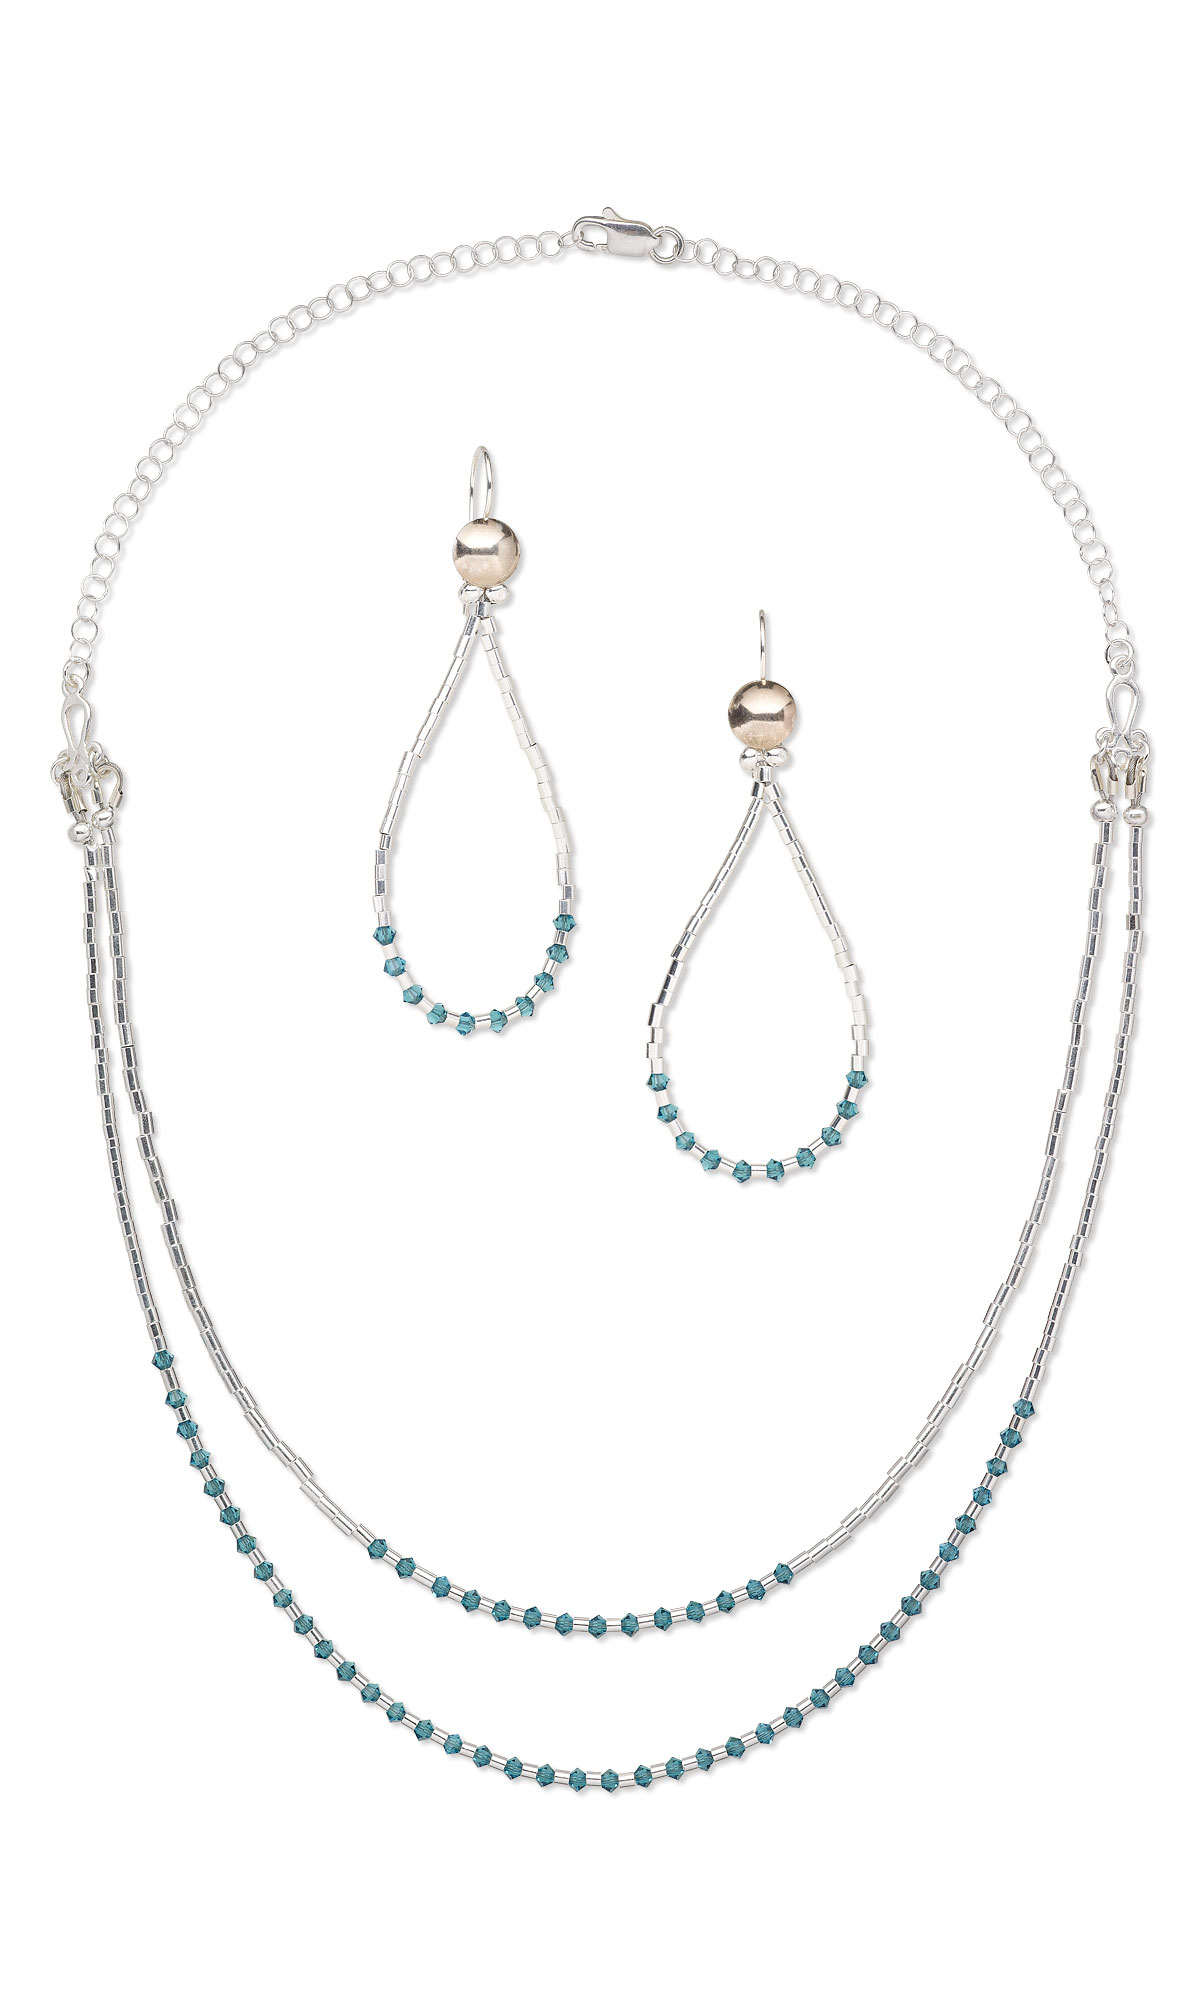 Jewelry Design - Double-Strand Necklace and Earring Set with Sterling ...